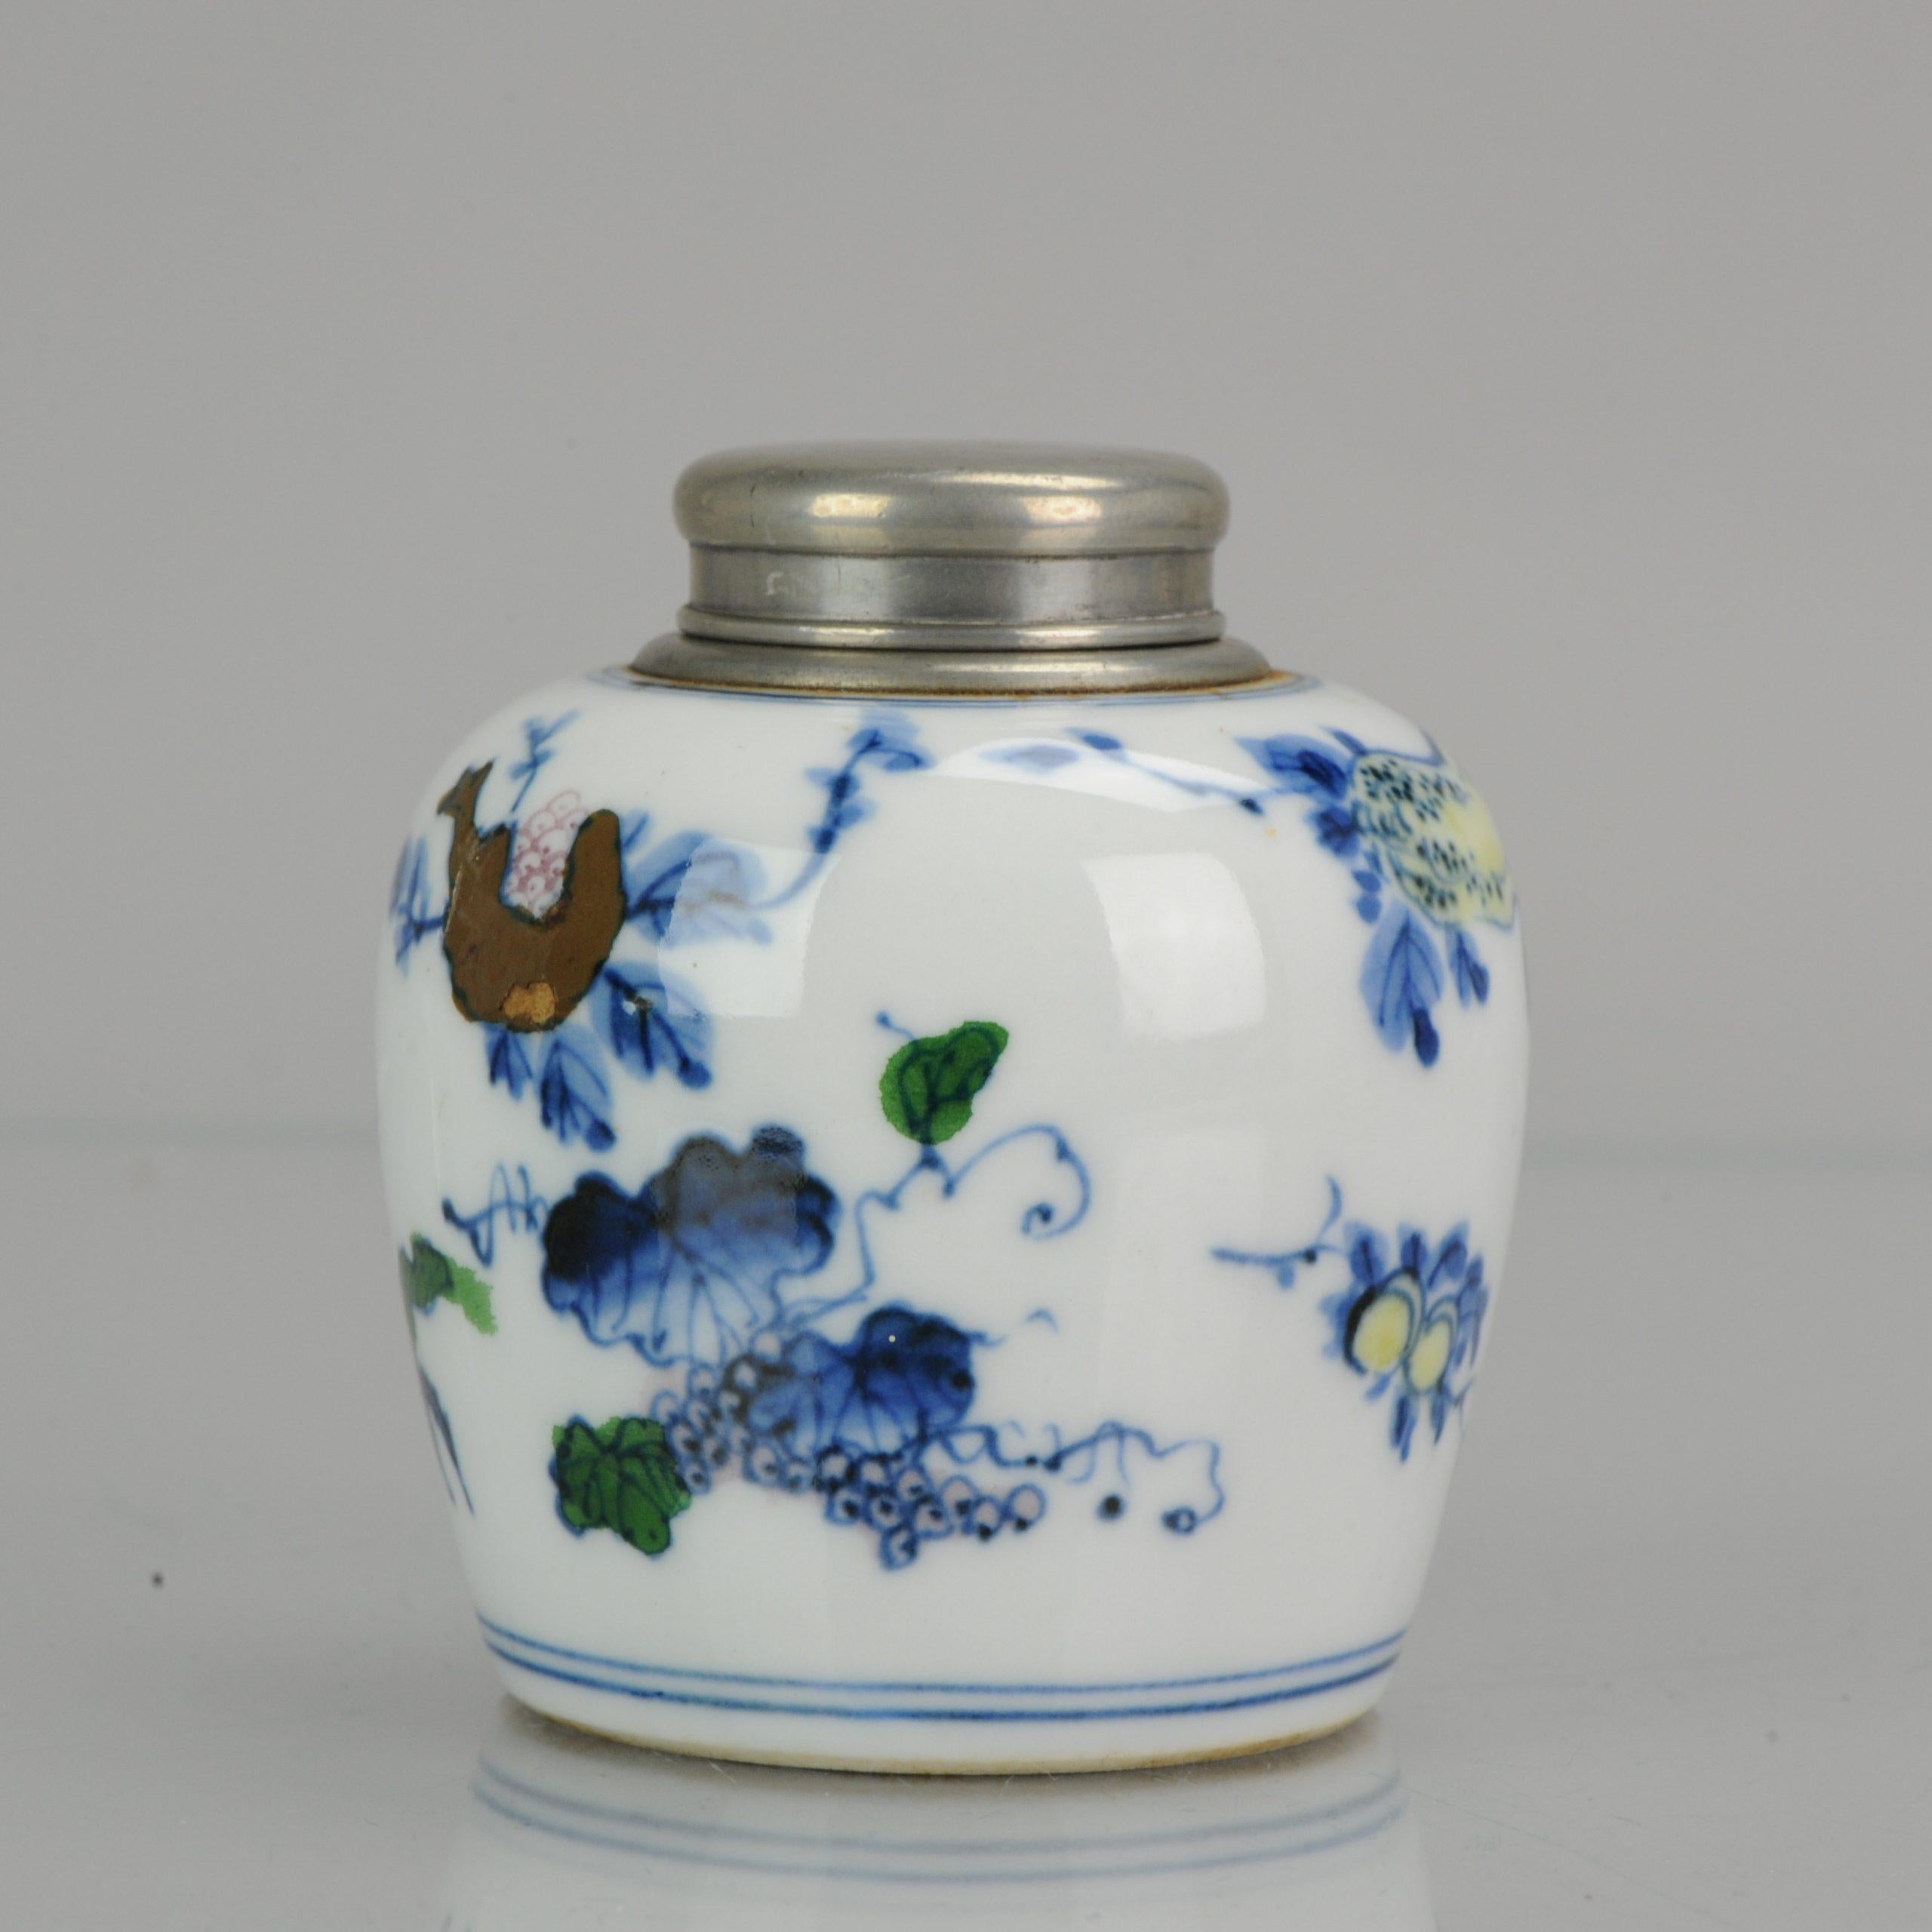 Antique 19th Century Porcelain Doucai Tea Caddy Marked Fruit Decoration Chinese 1